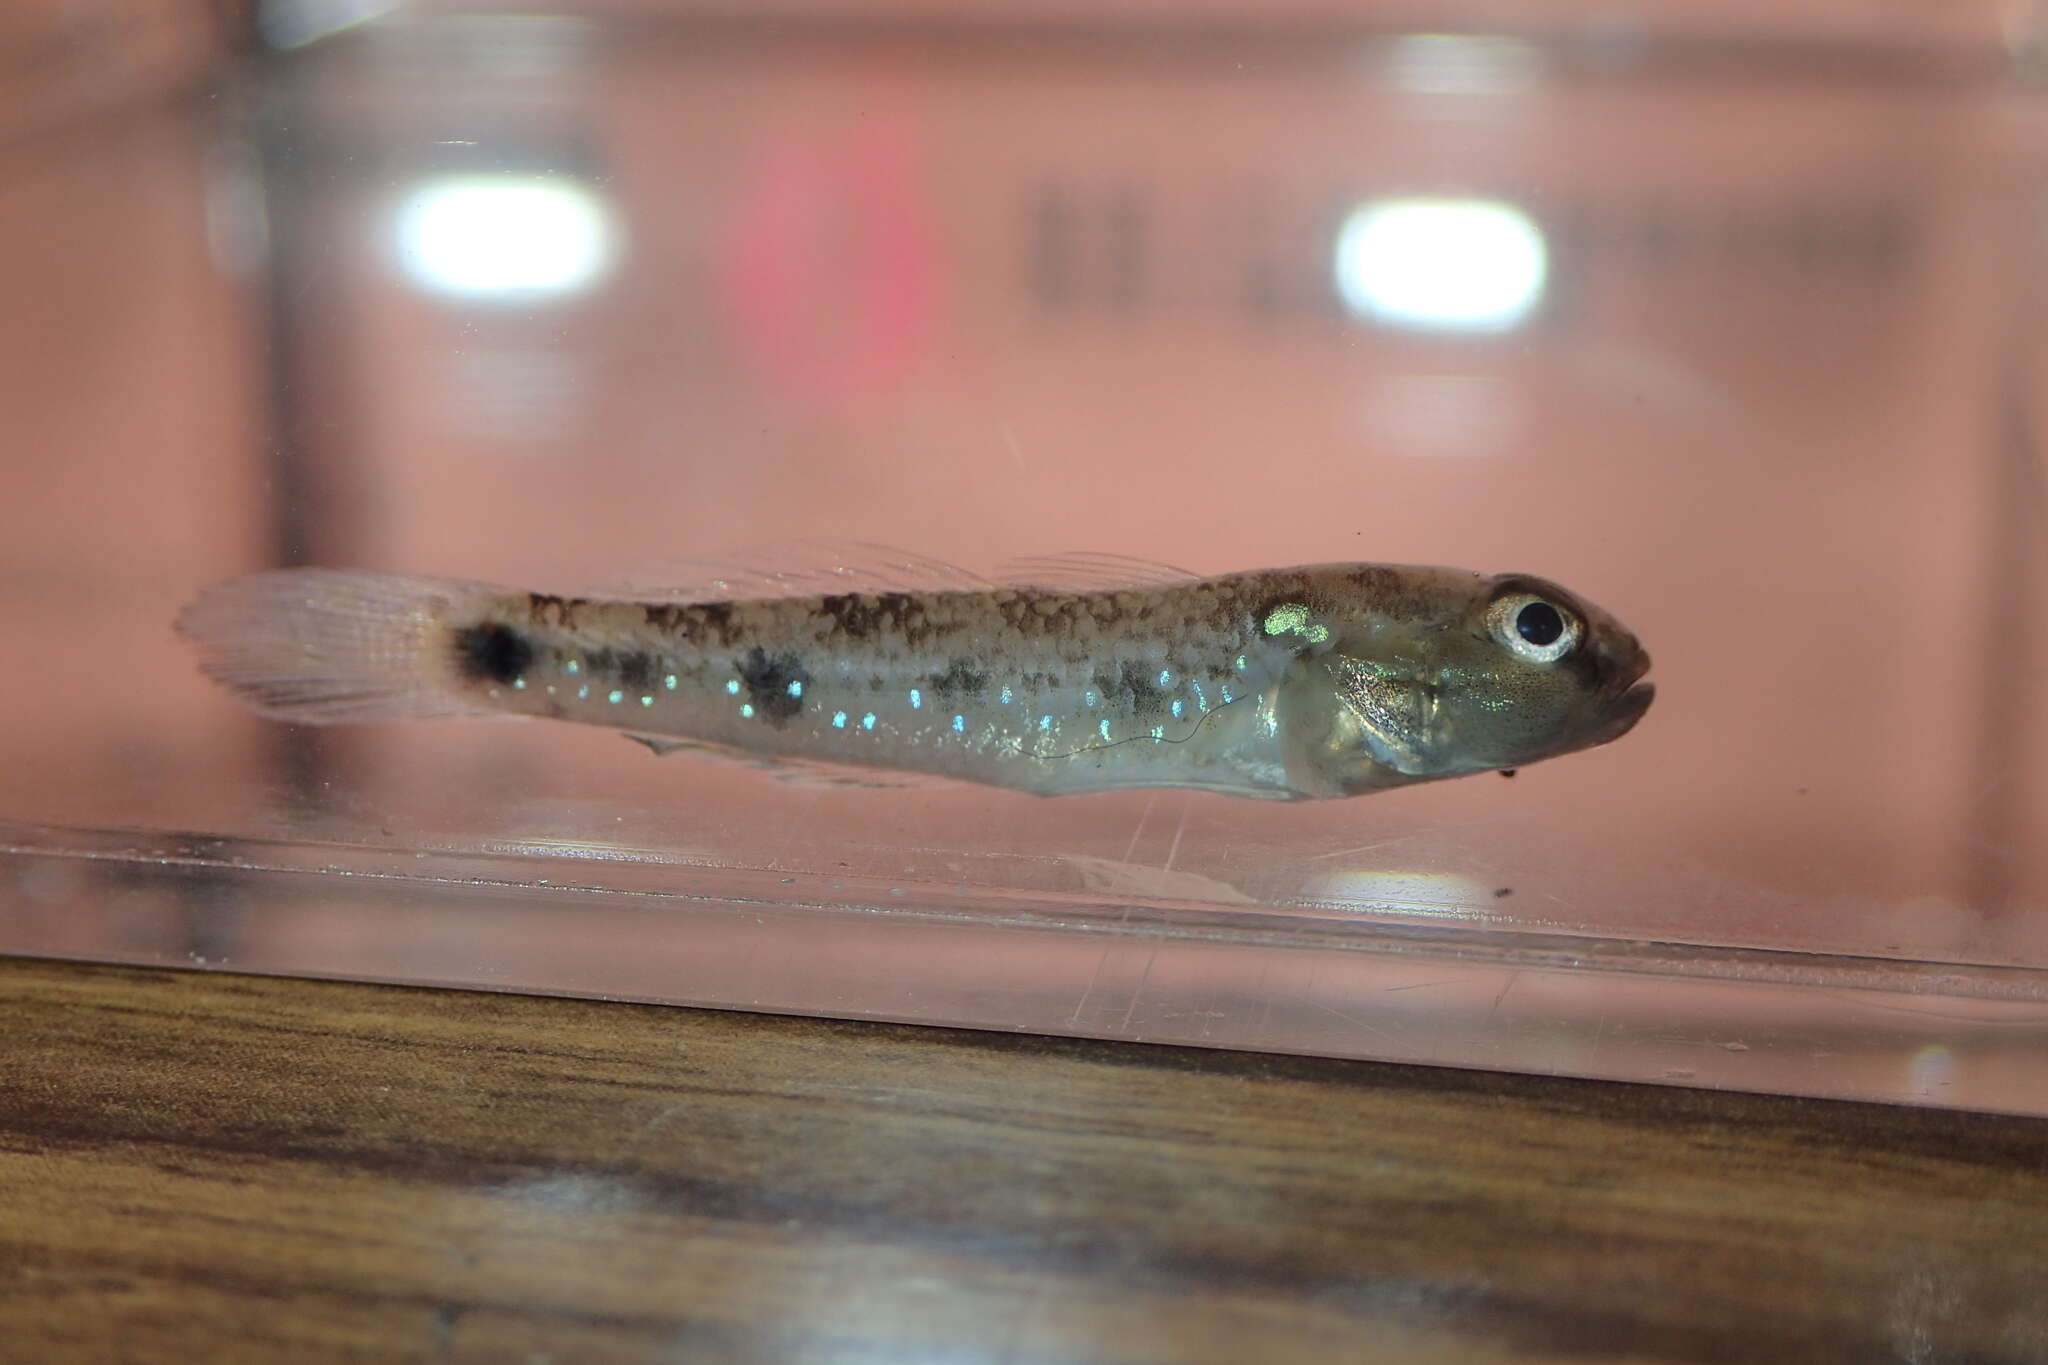 Image of Dog-toothed goby